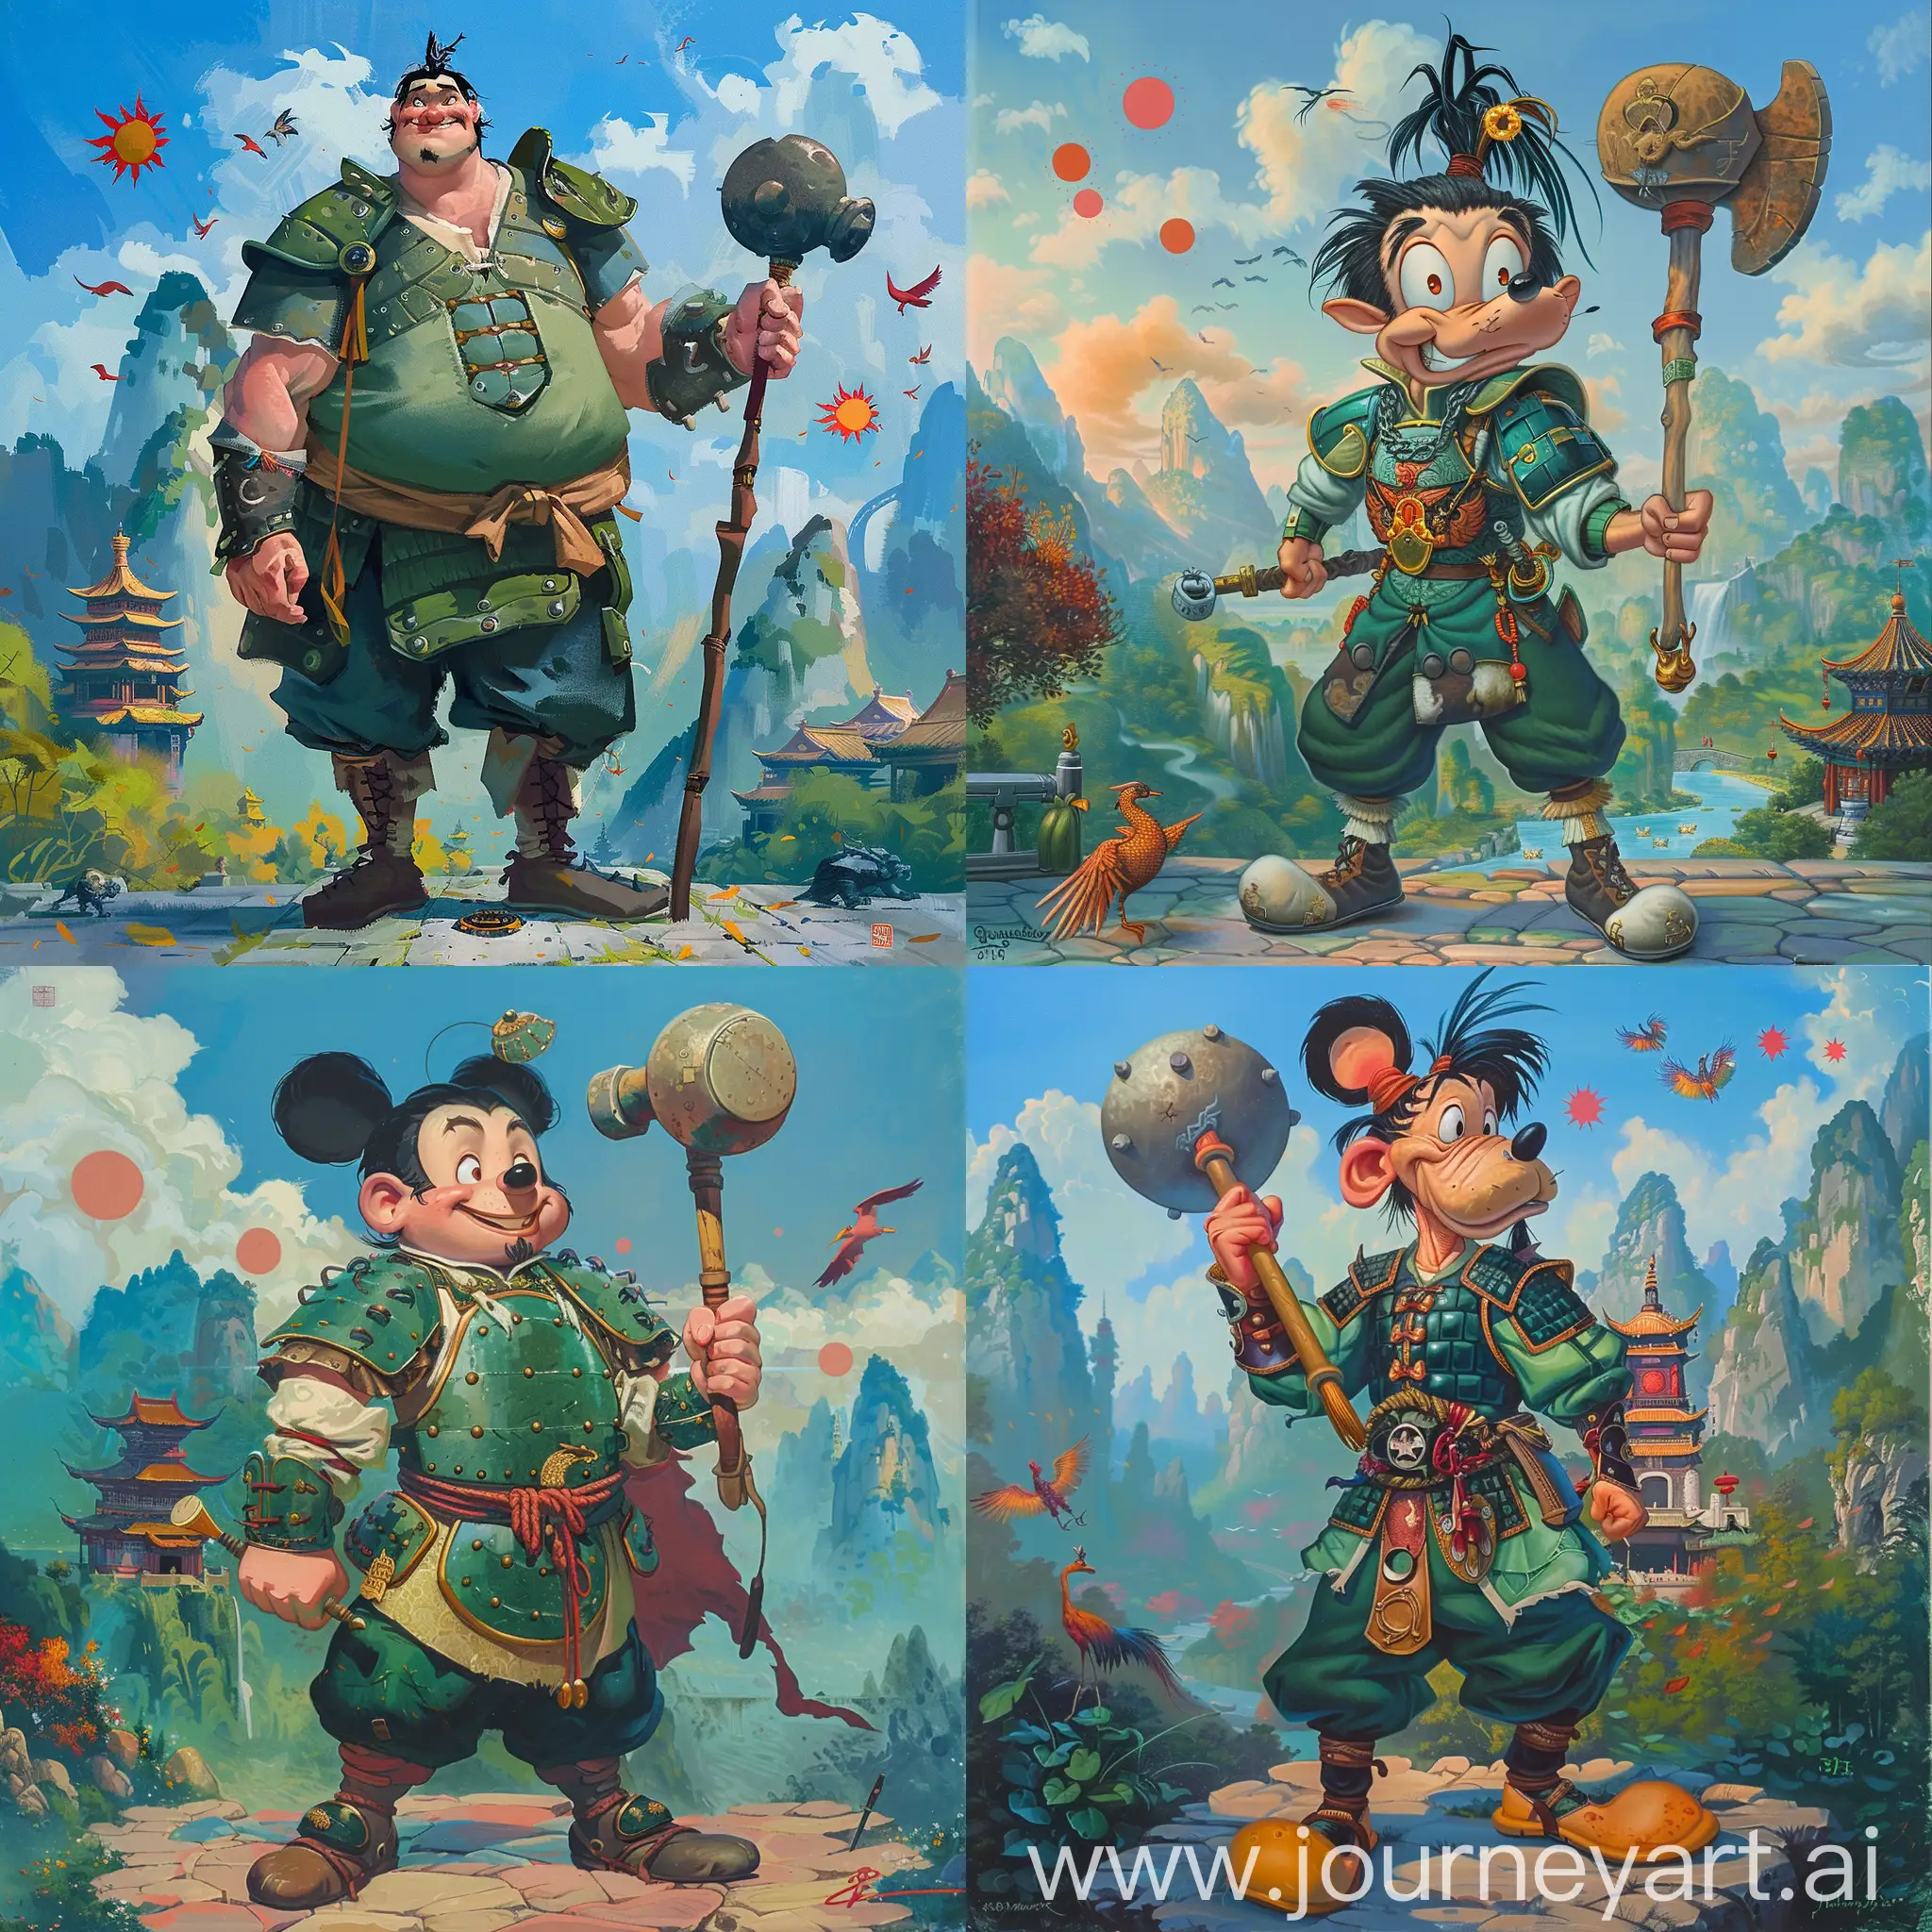 Historic painting style:

a Disney sincere and friendly  Quasimodo, from the Hunchback of Notre Dame cartoon, he has Chinese medieval Ming Dynasty hair style, he wears deep green and light green color Chinese style medieval armor, dark soil color pants and shoes, he holds a Chinese round war hammer in right hand, 

Chinese Guilin mountains and temple as background, small phoenix and three small red suns in blue sky.